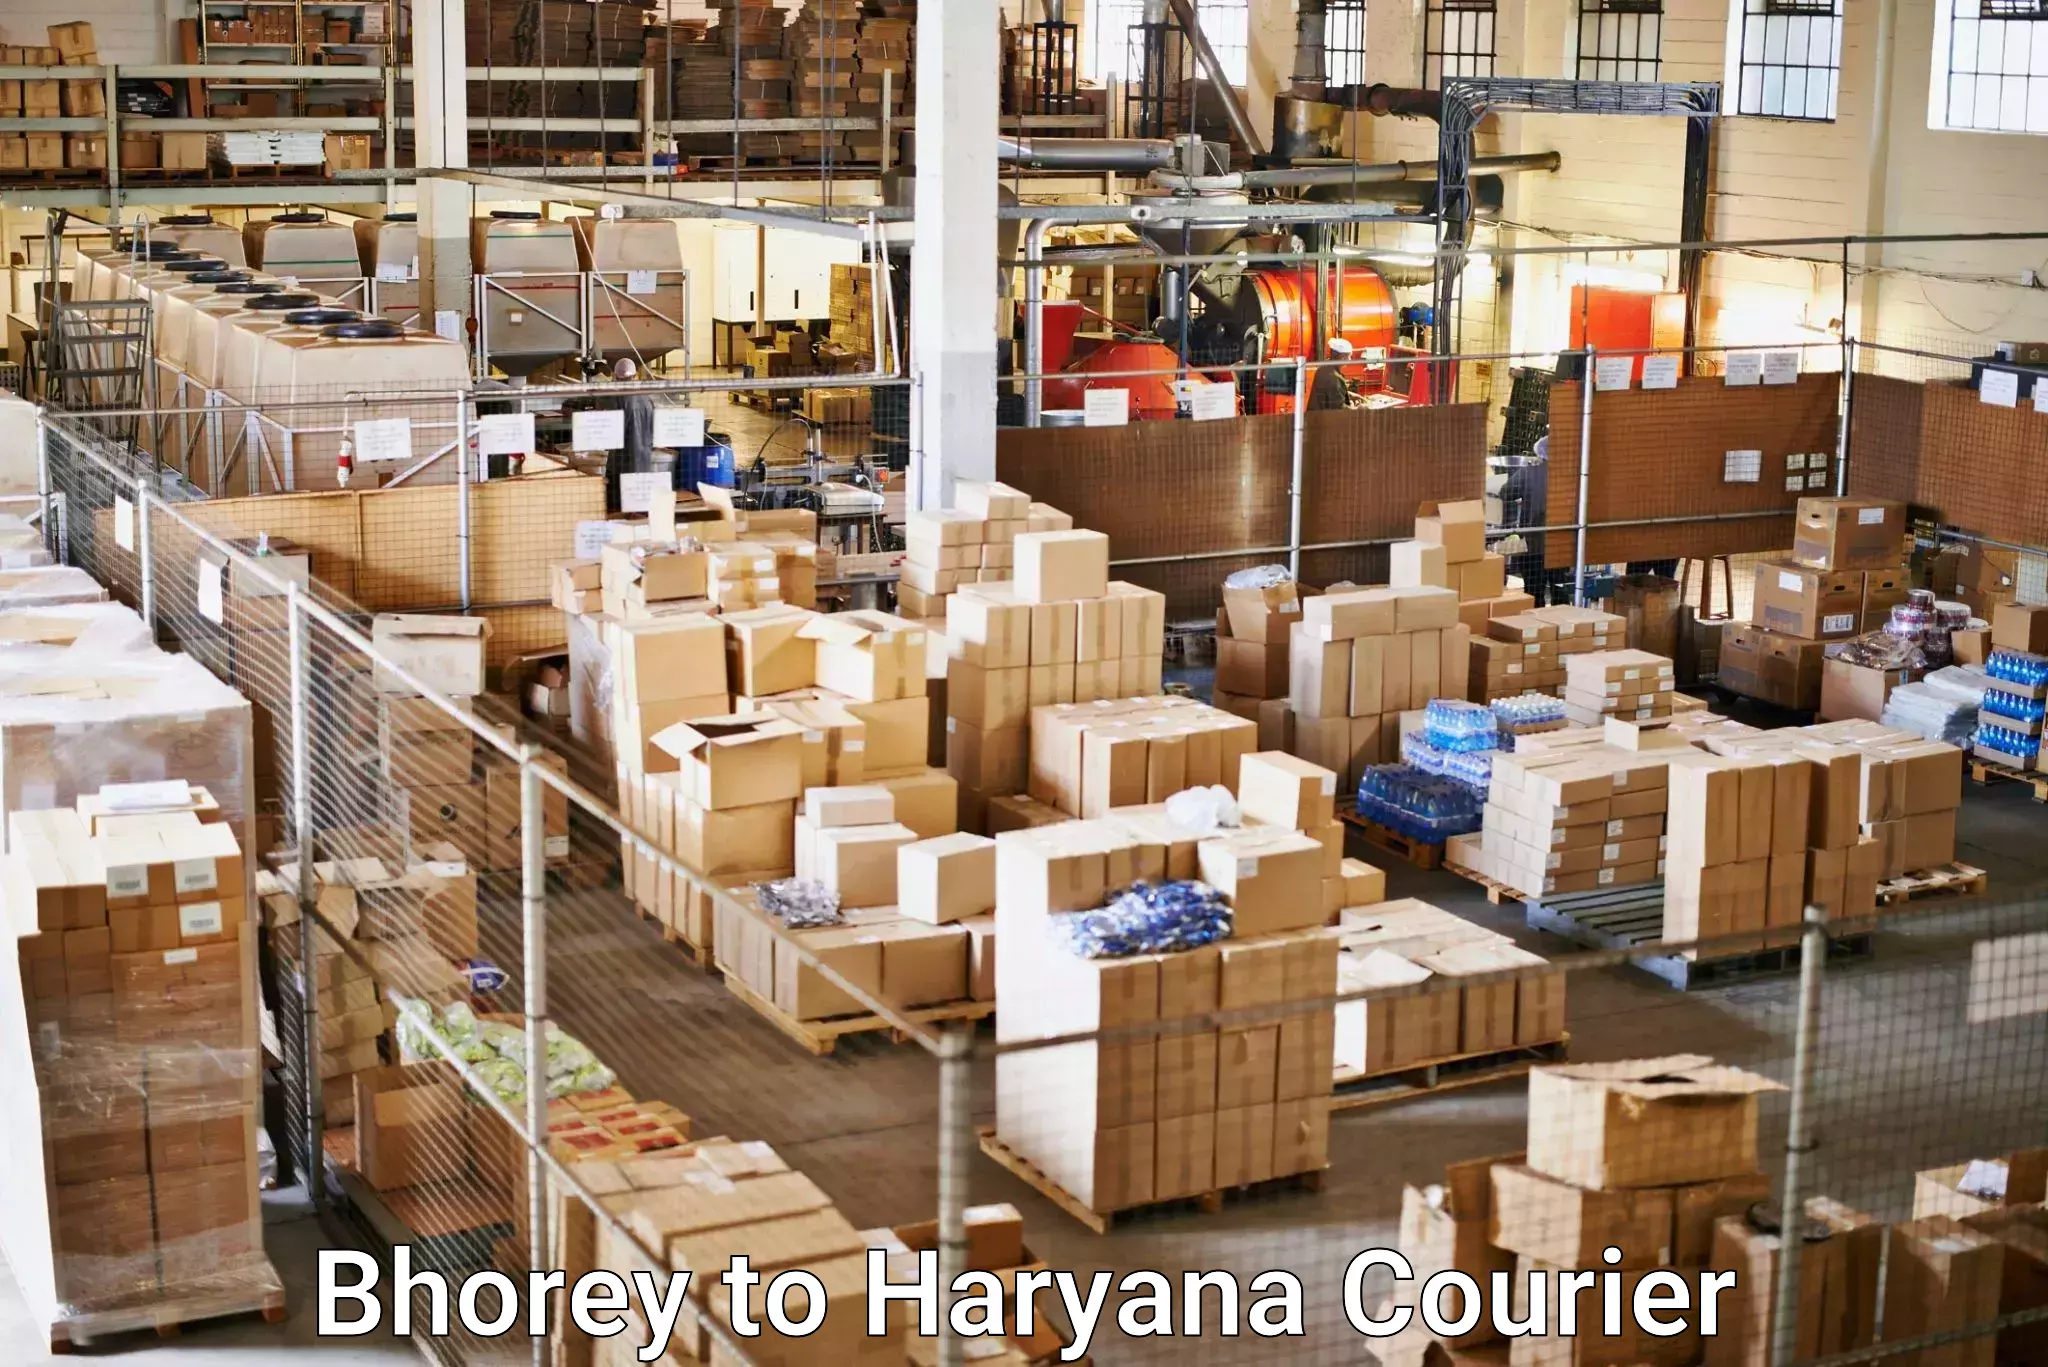 Courier services Bhorey to Faridabad